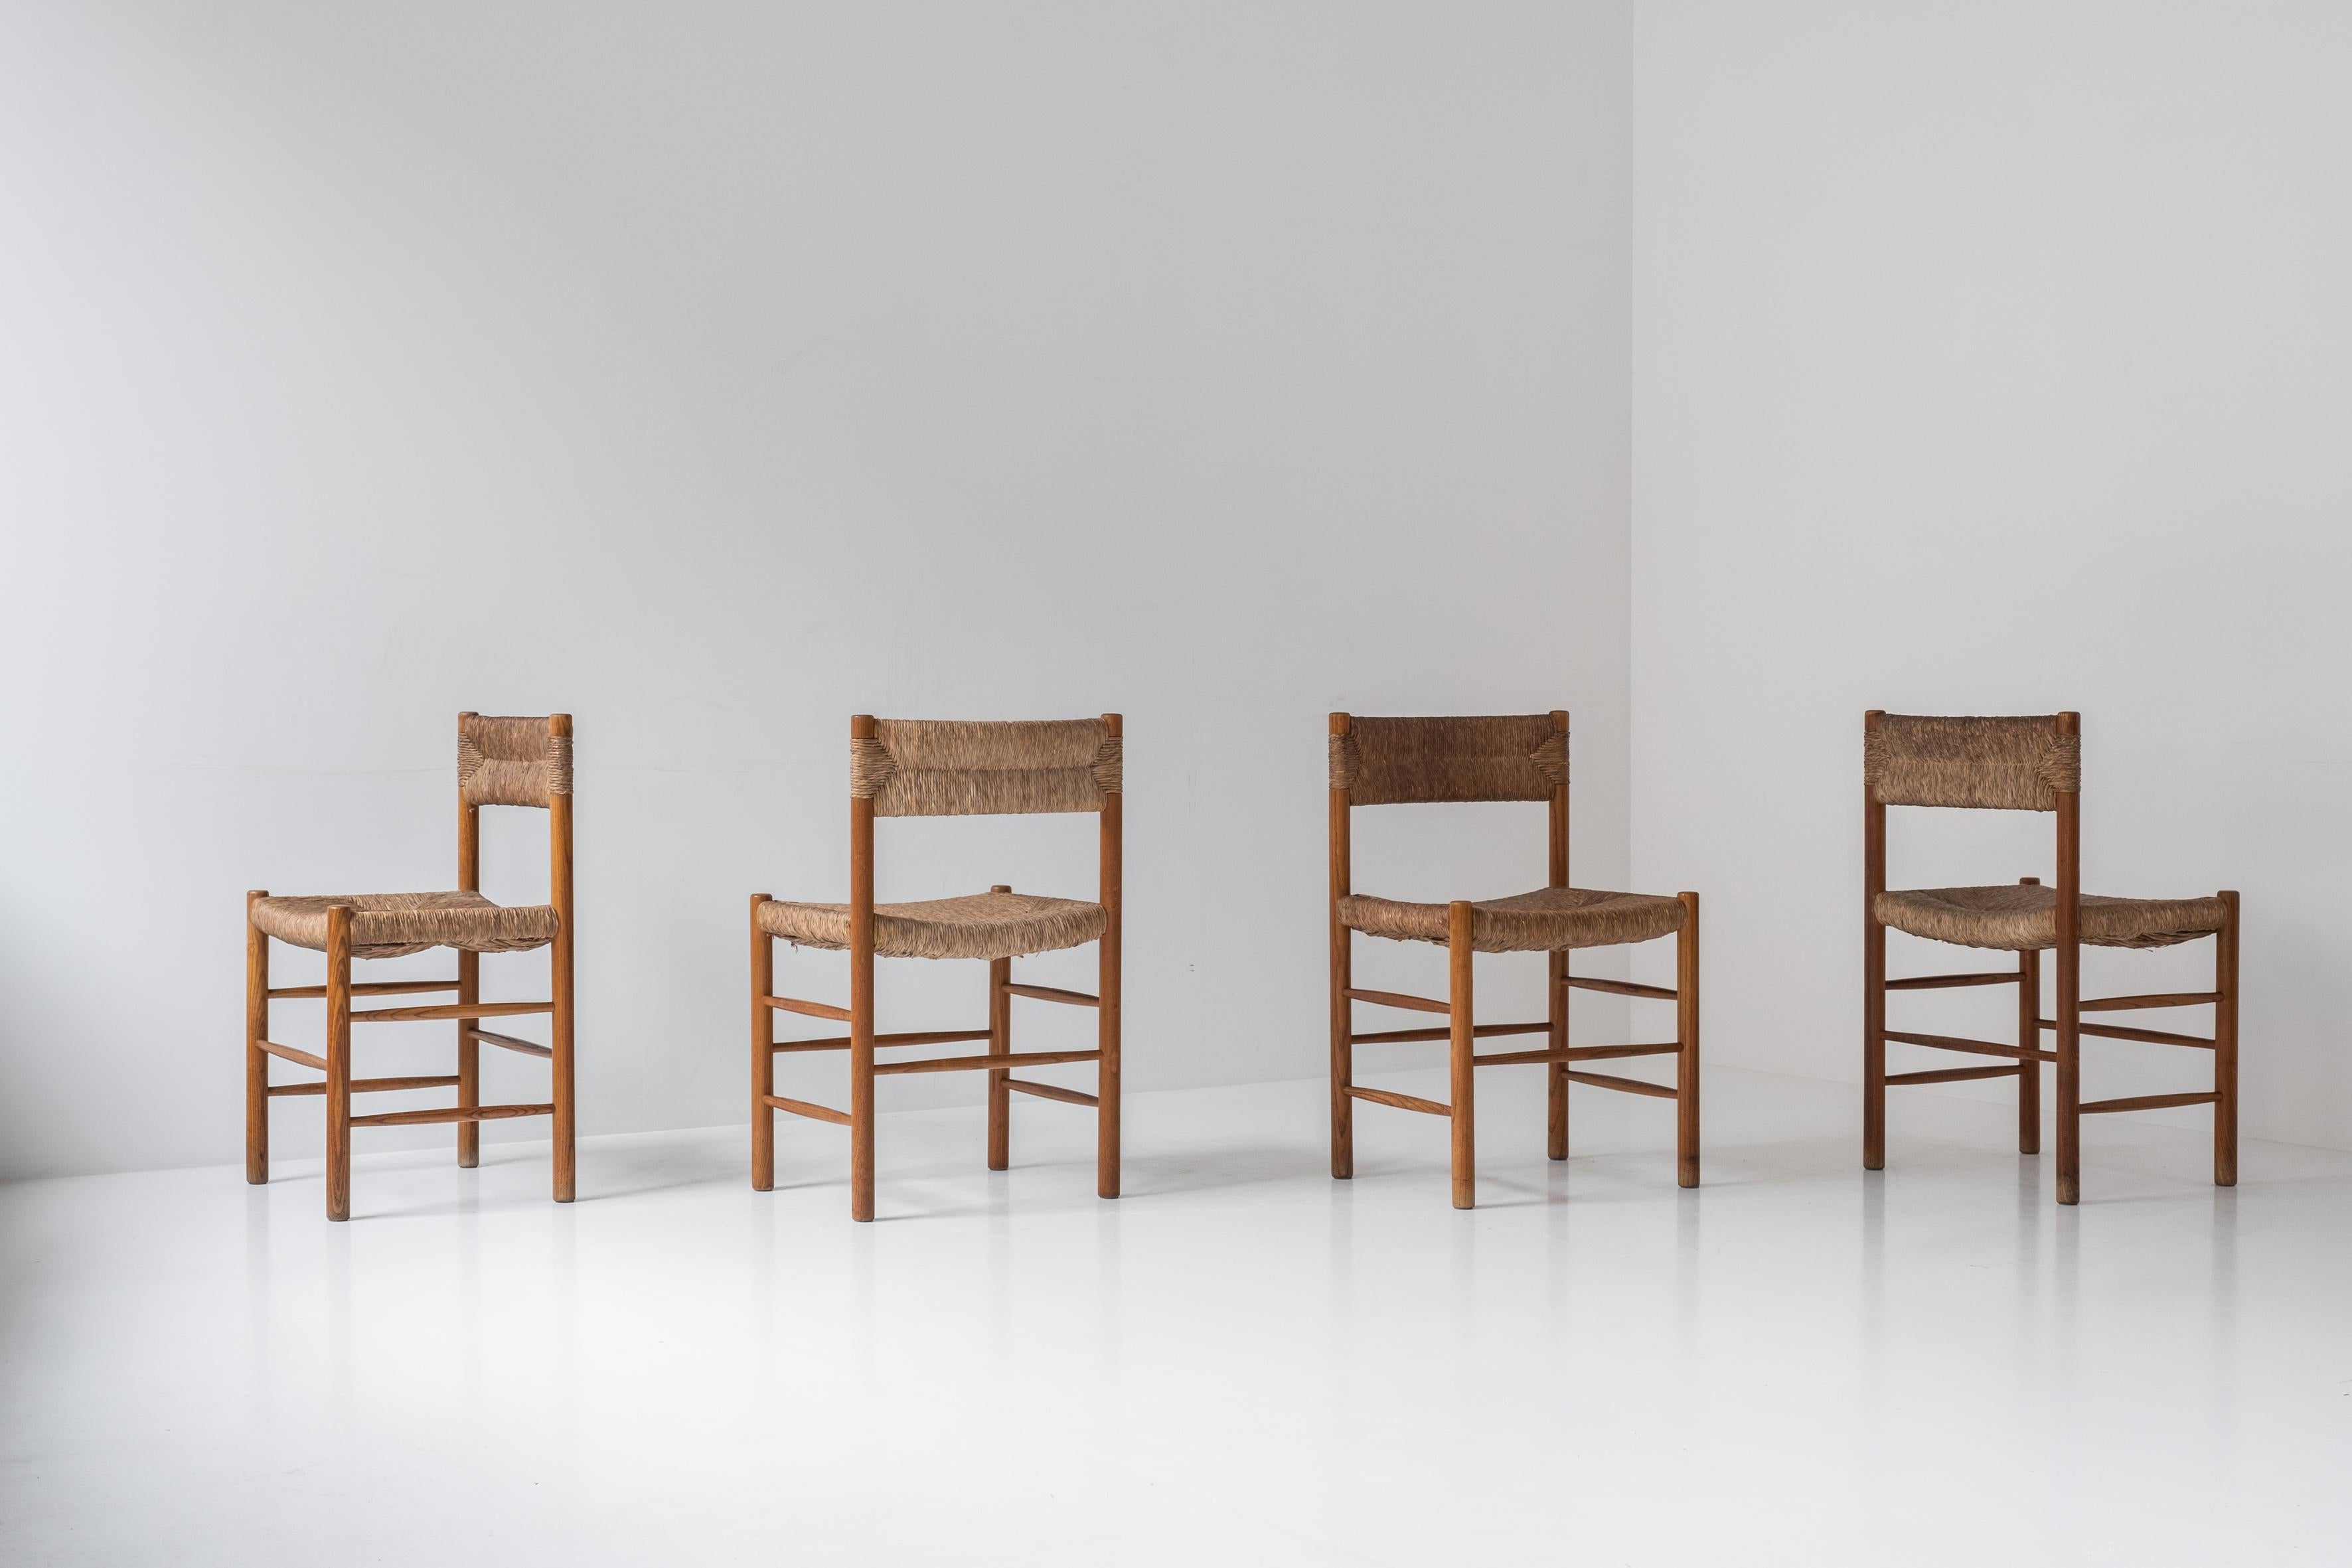 Important set of twelve ‘Dordogne’ dining chairs selected by Charlotte Perriand for Sentou, France 1960s. These chairs features ash wooden frames and straw seats and backs. Presented in a good and original condition. Provenance upon request.